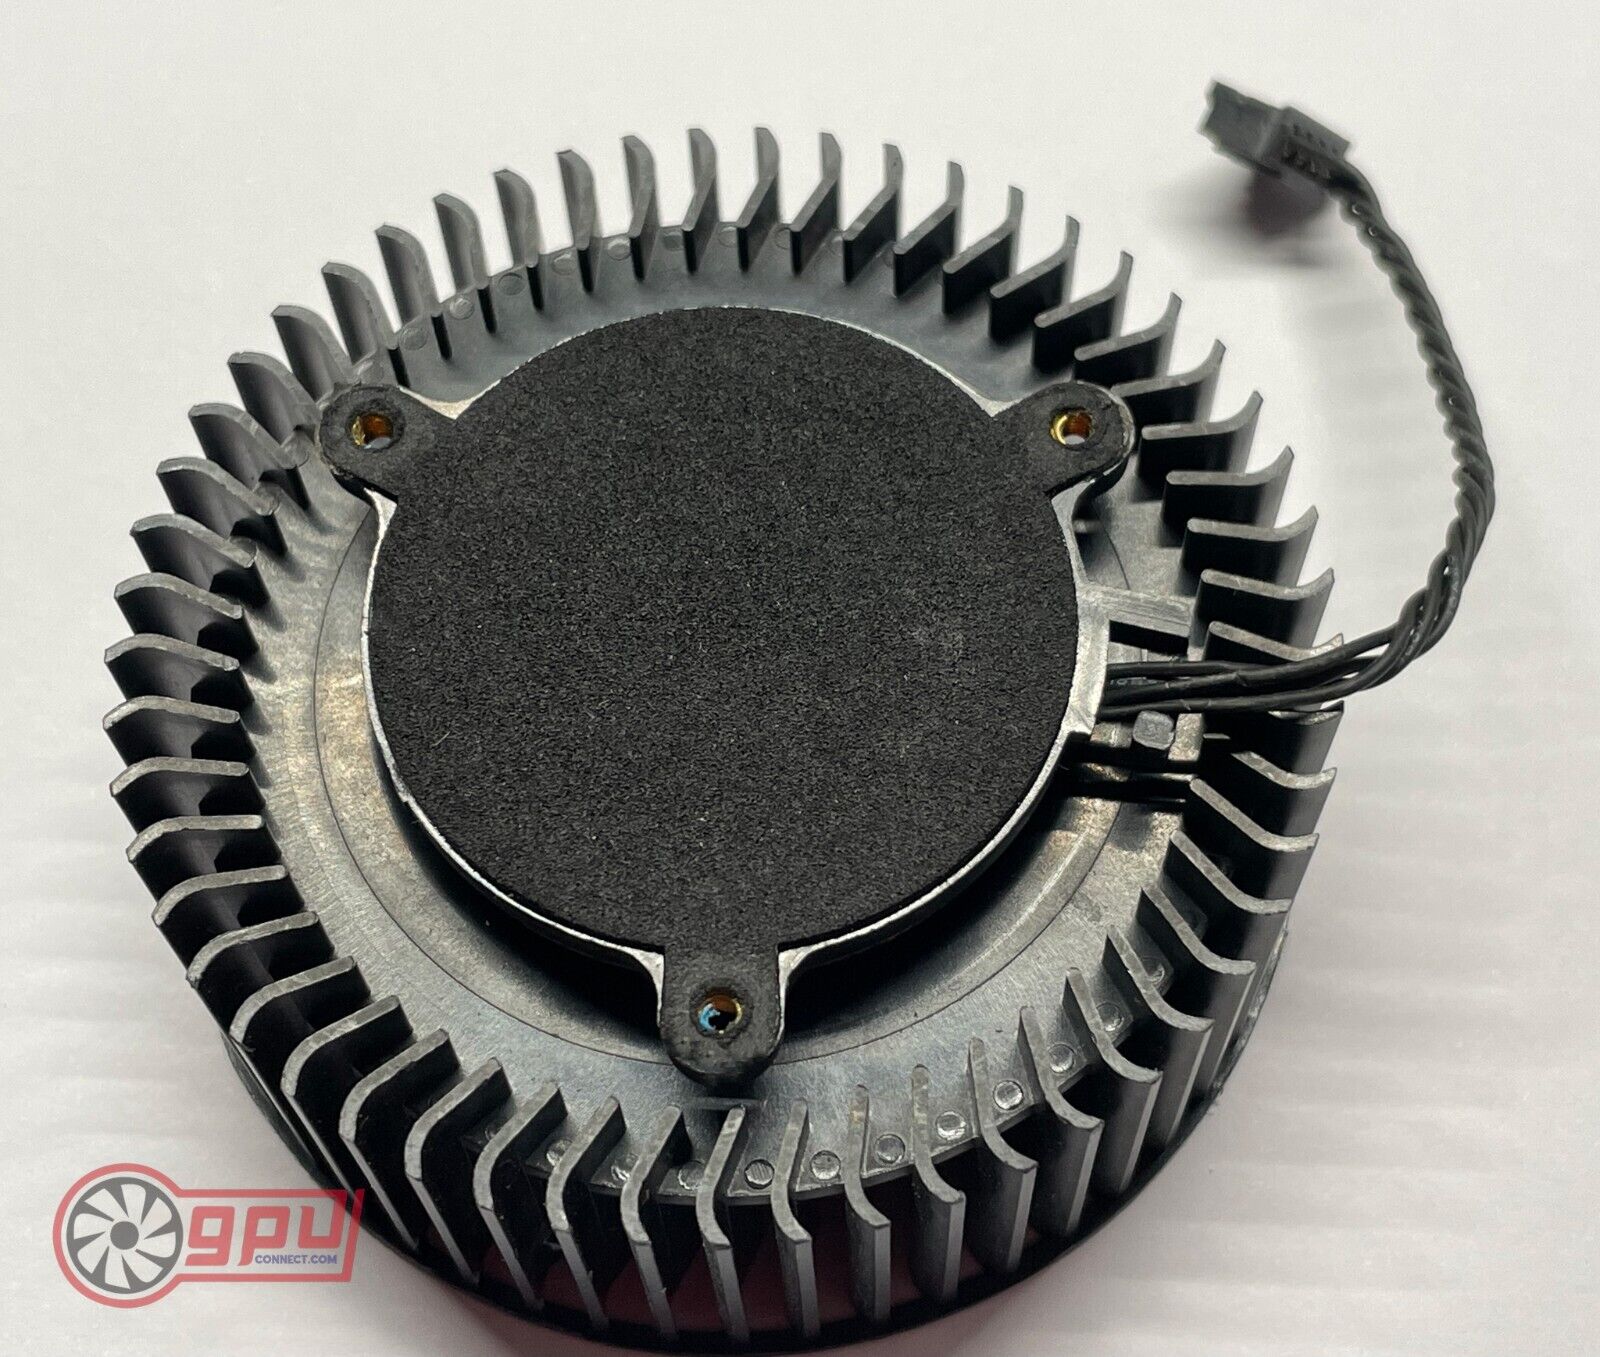 PALIT RTX 2070 2080 Ti SUPER Blower Style Replacement Graphics Card Fan (4 Pin) - GPUCONNECT.COM